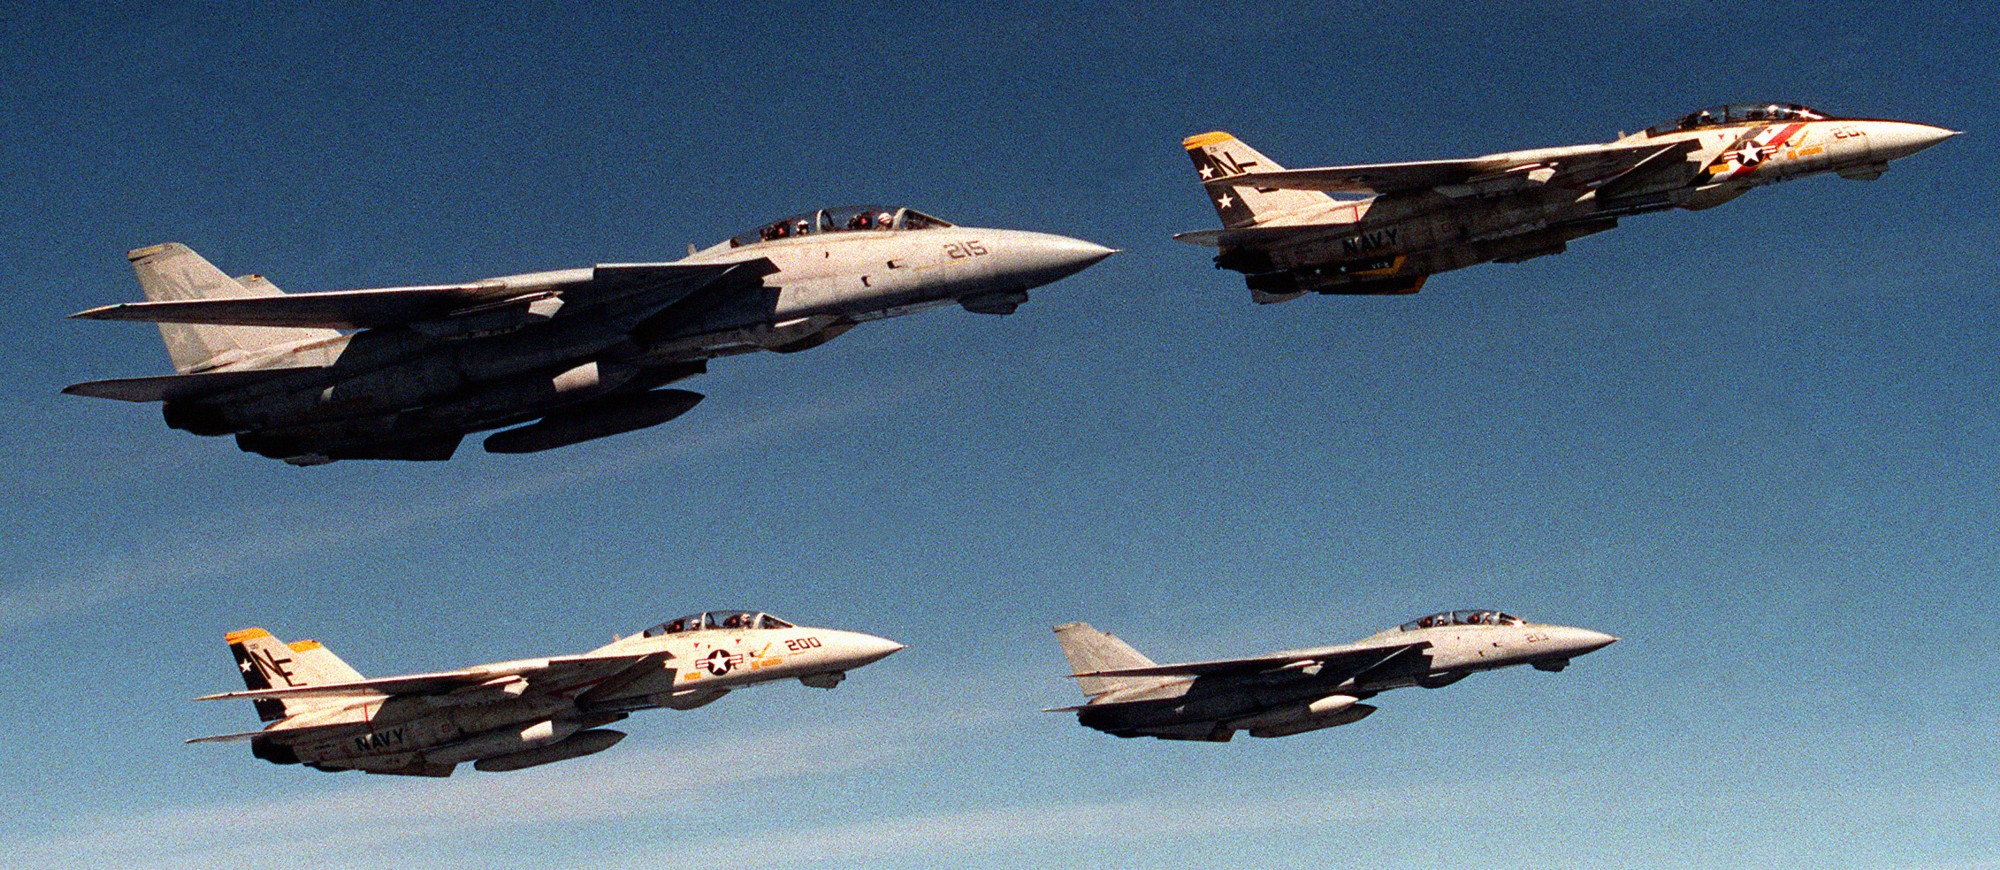 vf-2 bounty hunters fighter squadron fitron f-14a tomcat carrier air wing cvw-2 uss ranger cv-61 13